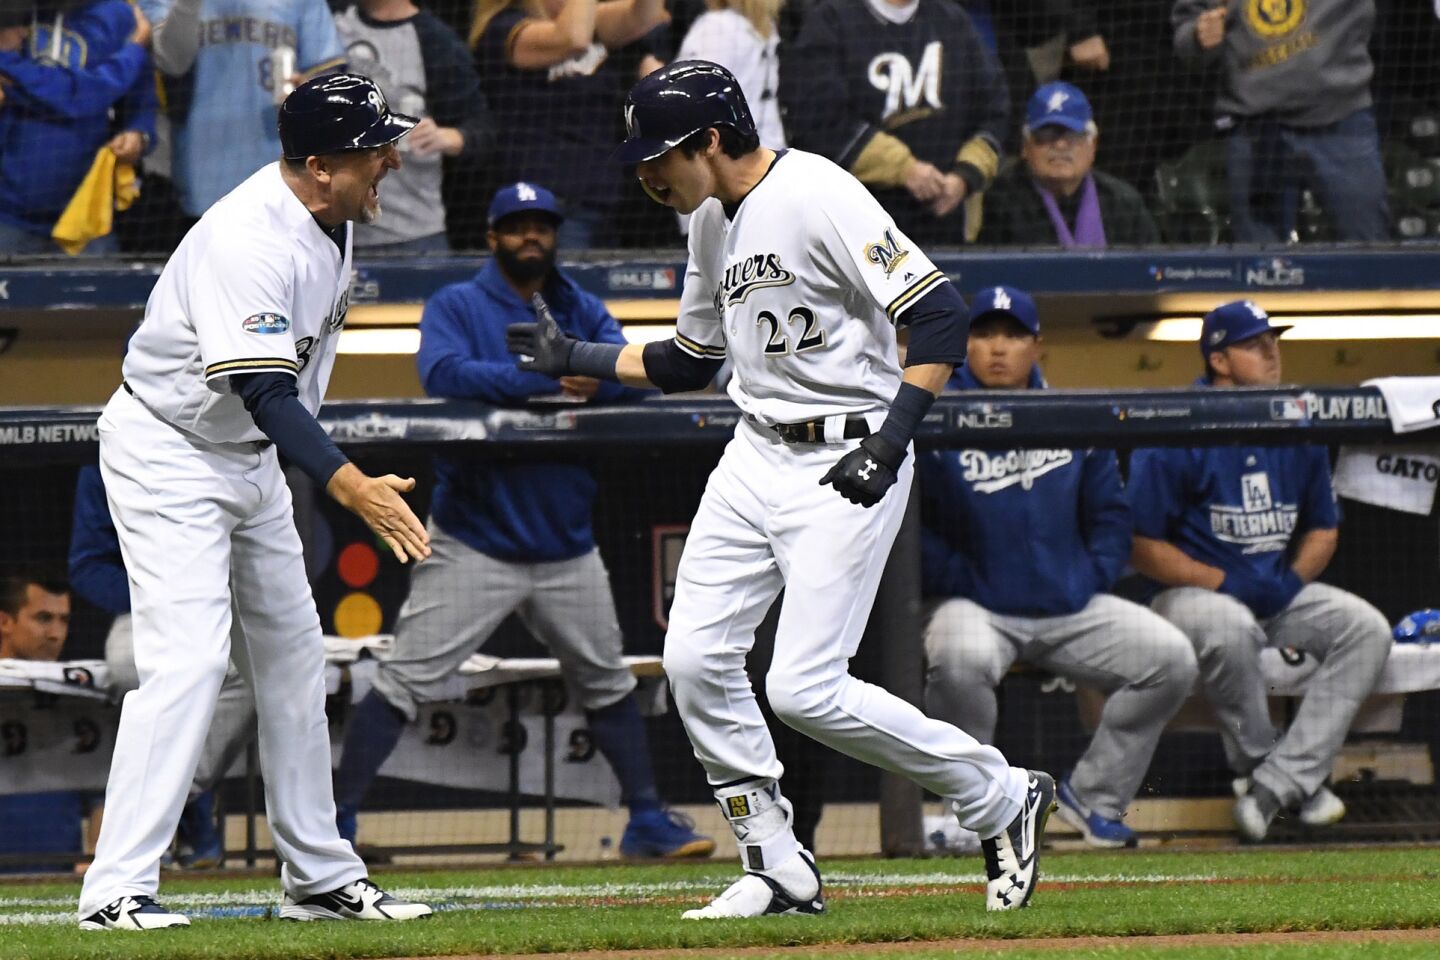 With the Dodgers looking on, Milwaukee Brewers Christian Yelich celebrates after hitting a solo homerun in the first inning.